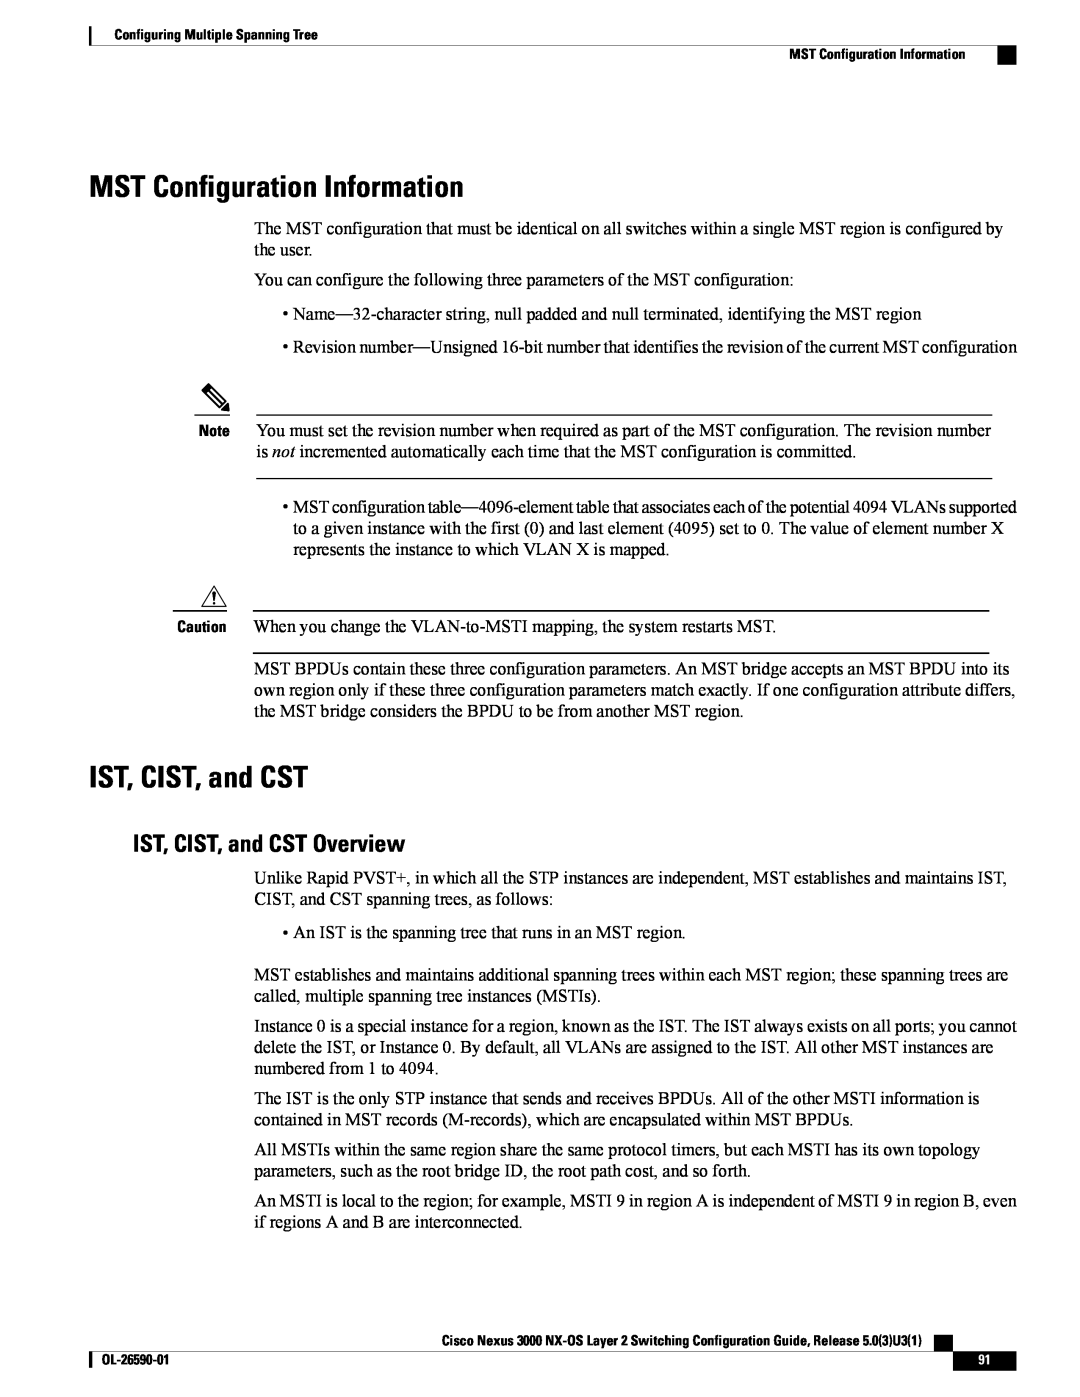 Cisco Systems N3KC3064TFAL3, N3KC3048TP1GE manual MST Configuration Information, IST, CIST, and CST Overview 